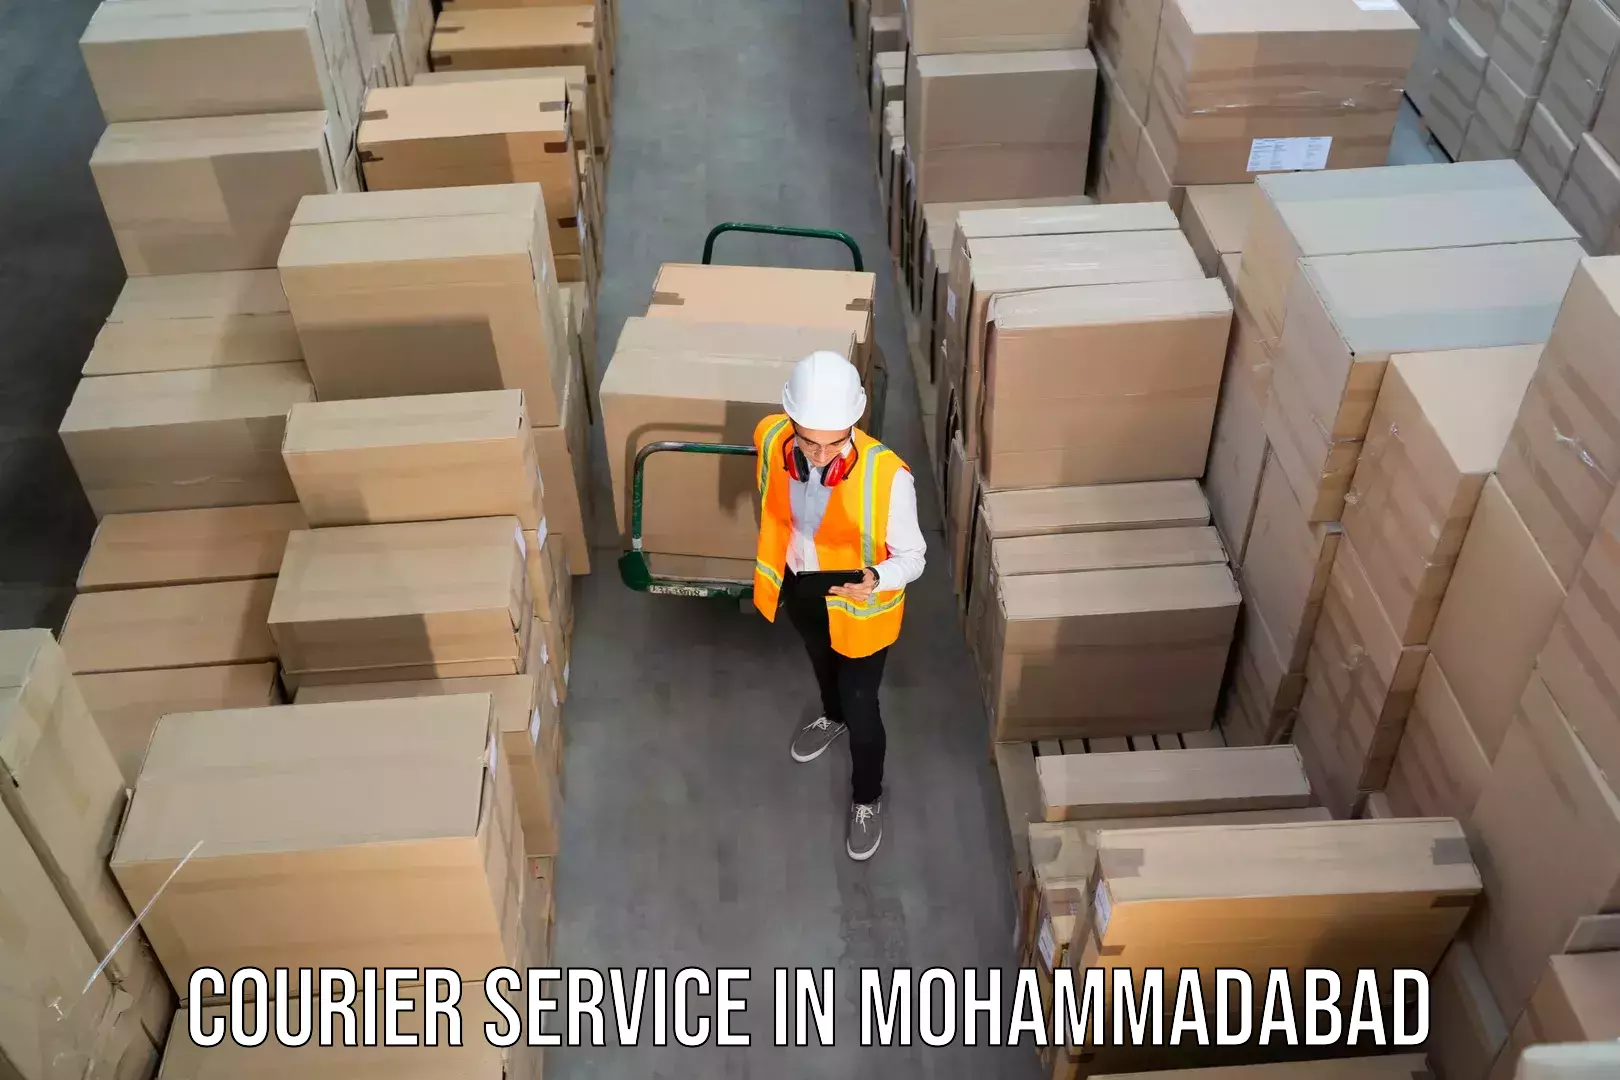 24-hour delivery options in Mohammadabad